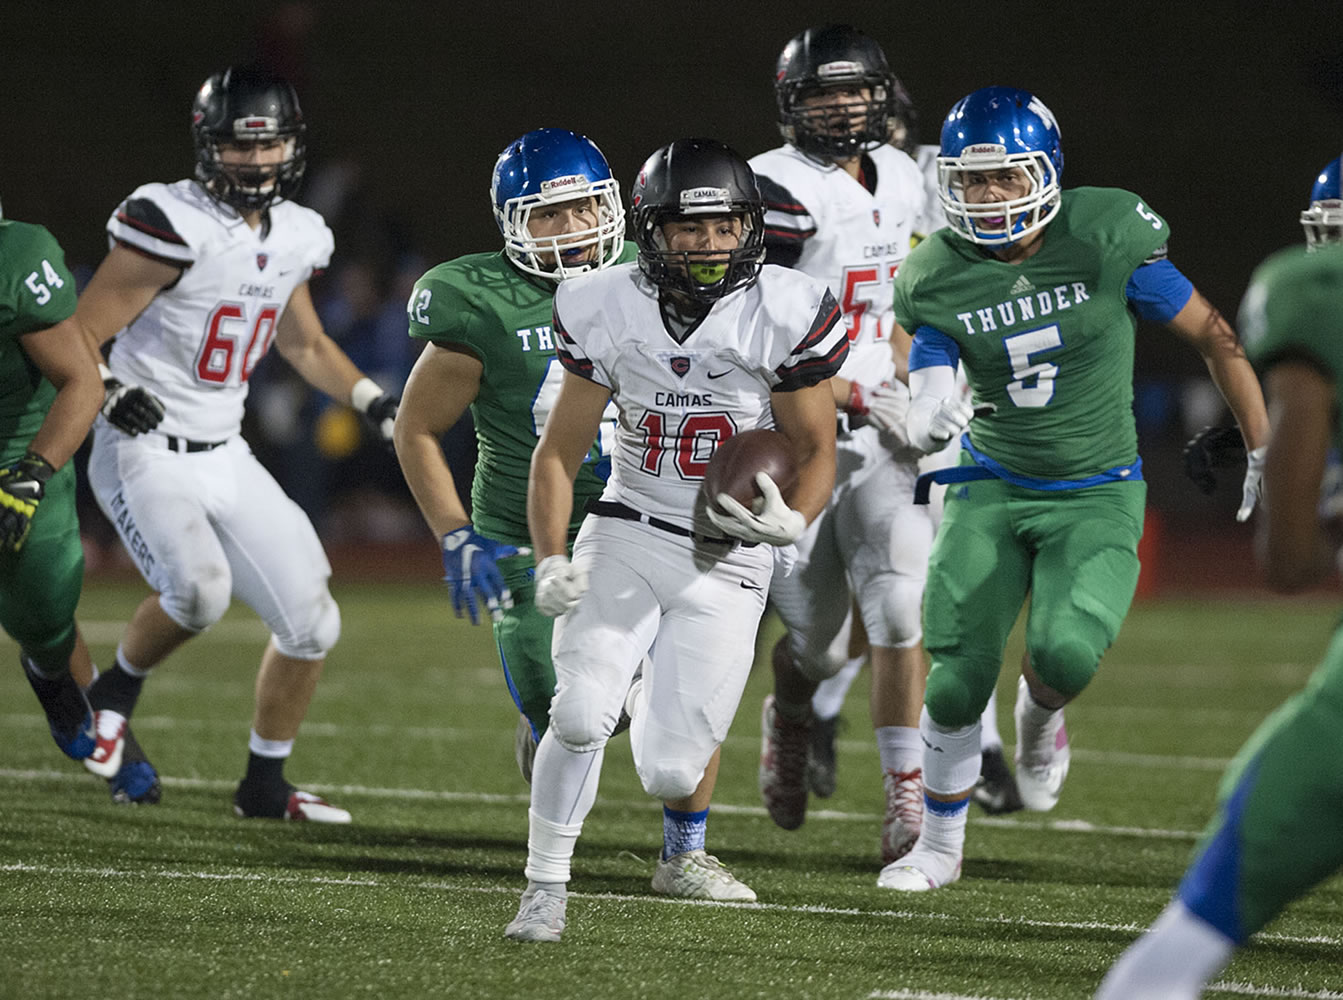 Camas' Jordan Del Moral (10) breaks free from a pack of players in the second quarter Friday night, Oct. 23, 2015 at McKenzie Stadium.